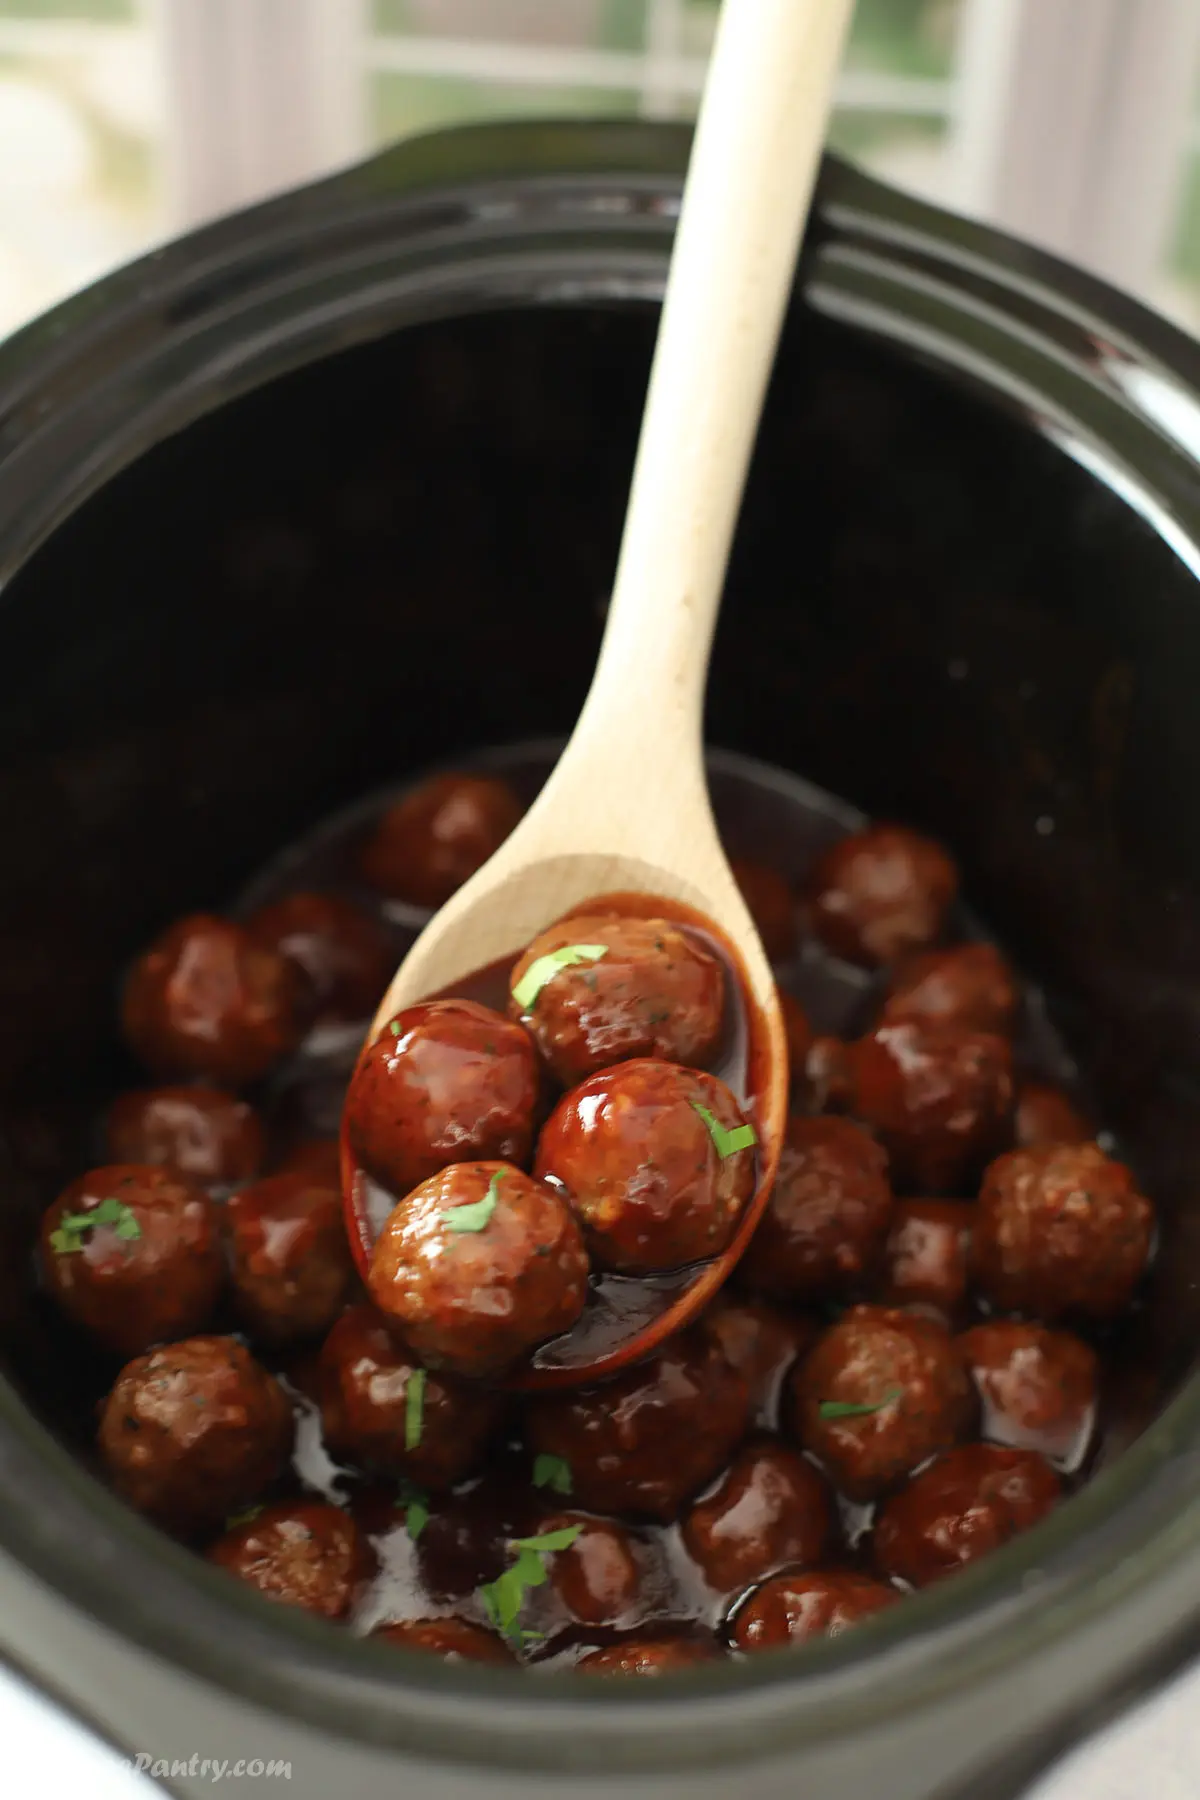 A spoon scooping some bbq meatballs out of a crockpot.